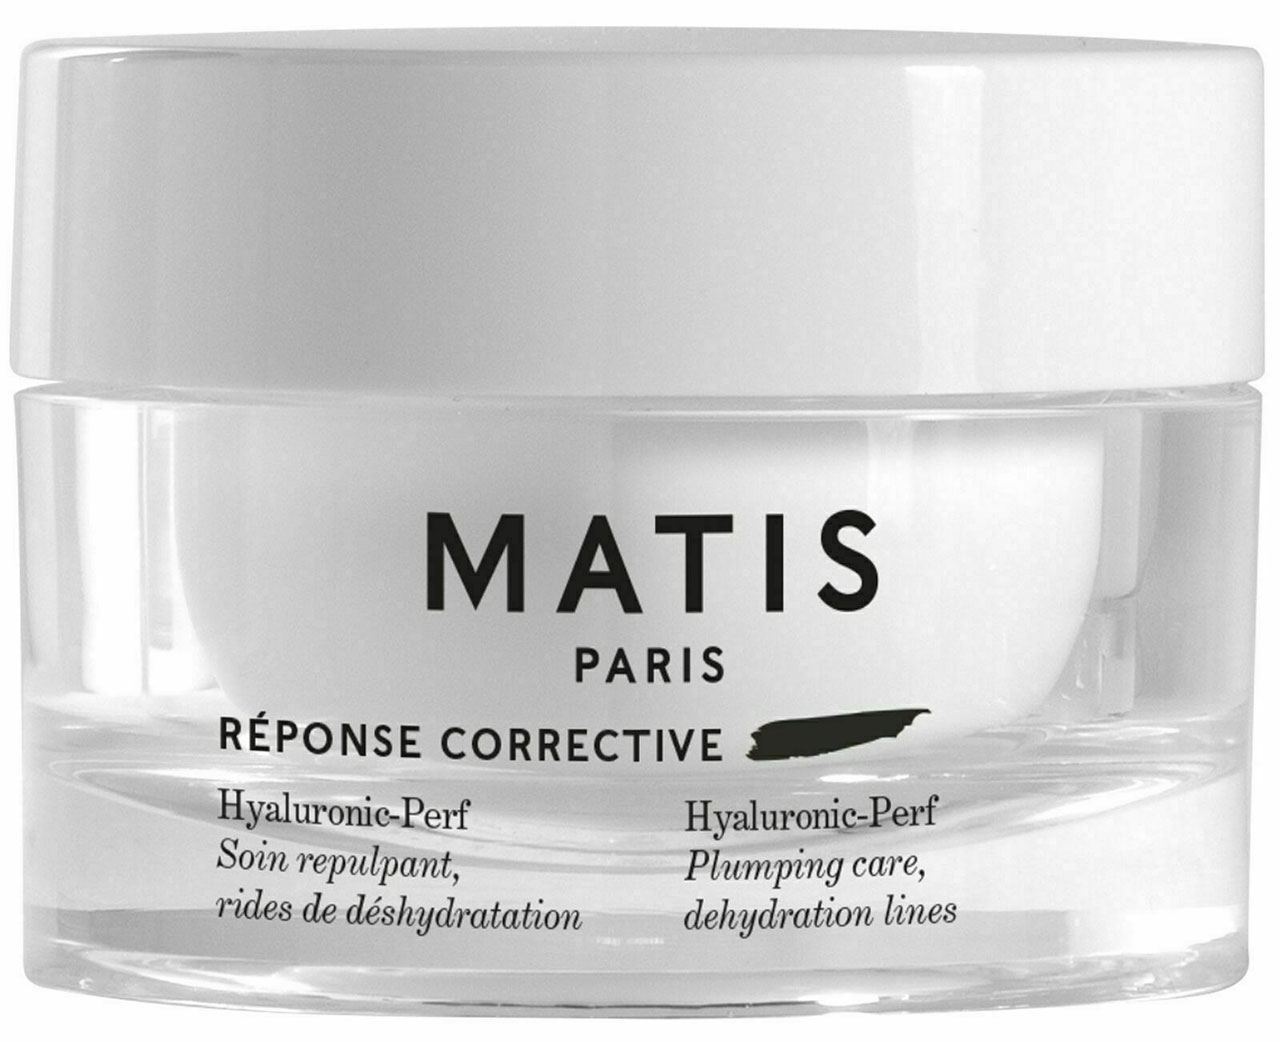 What is in Matis and is it non toxic.  Is it just Hyaluronic acid or more ingredients that makes sound so good?